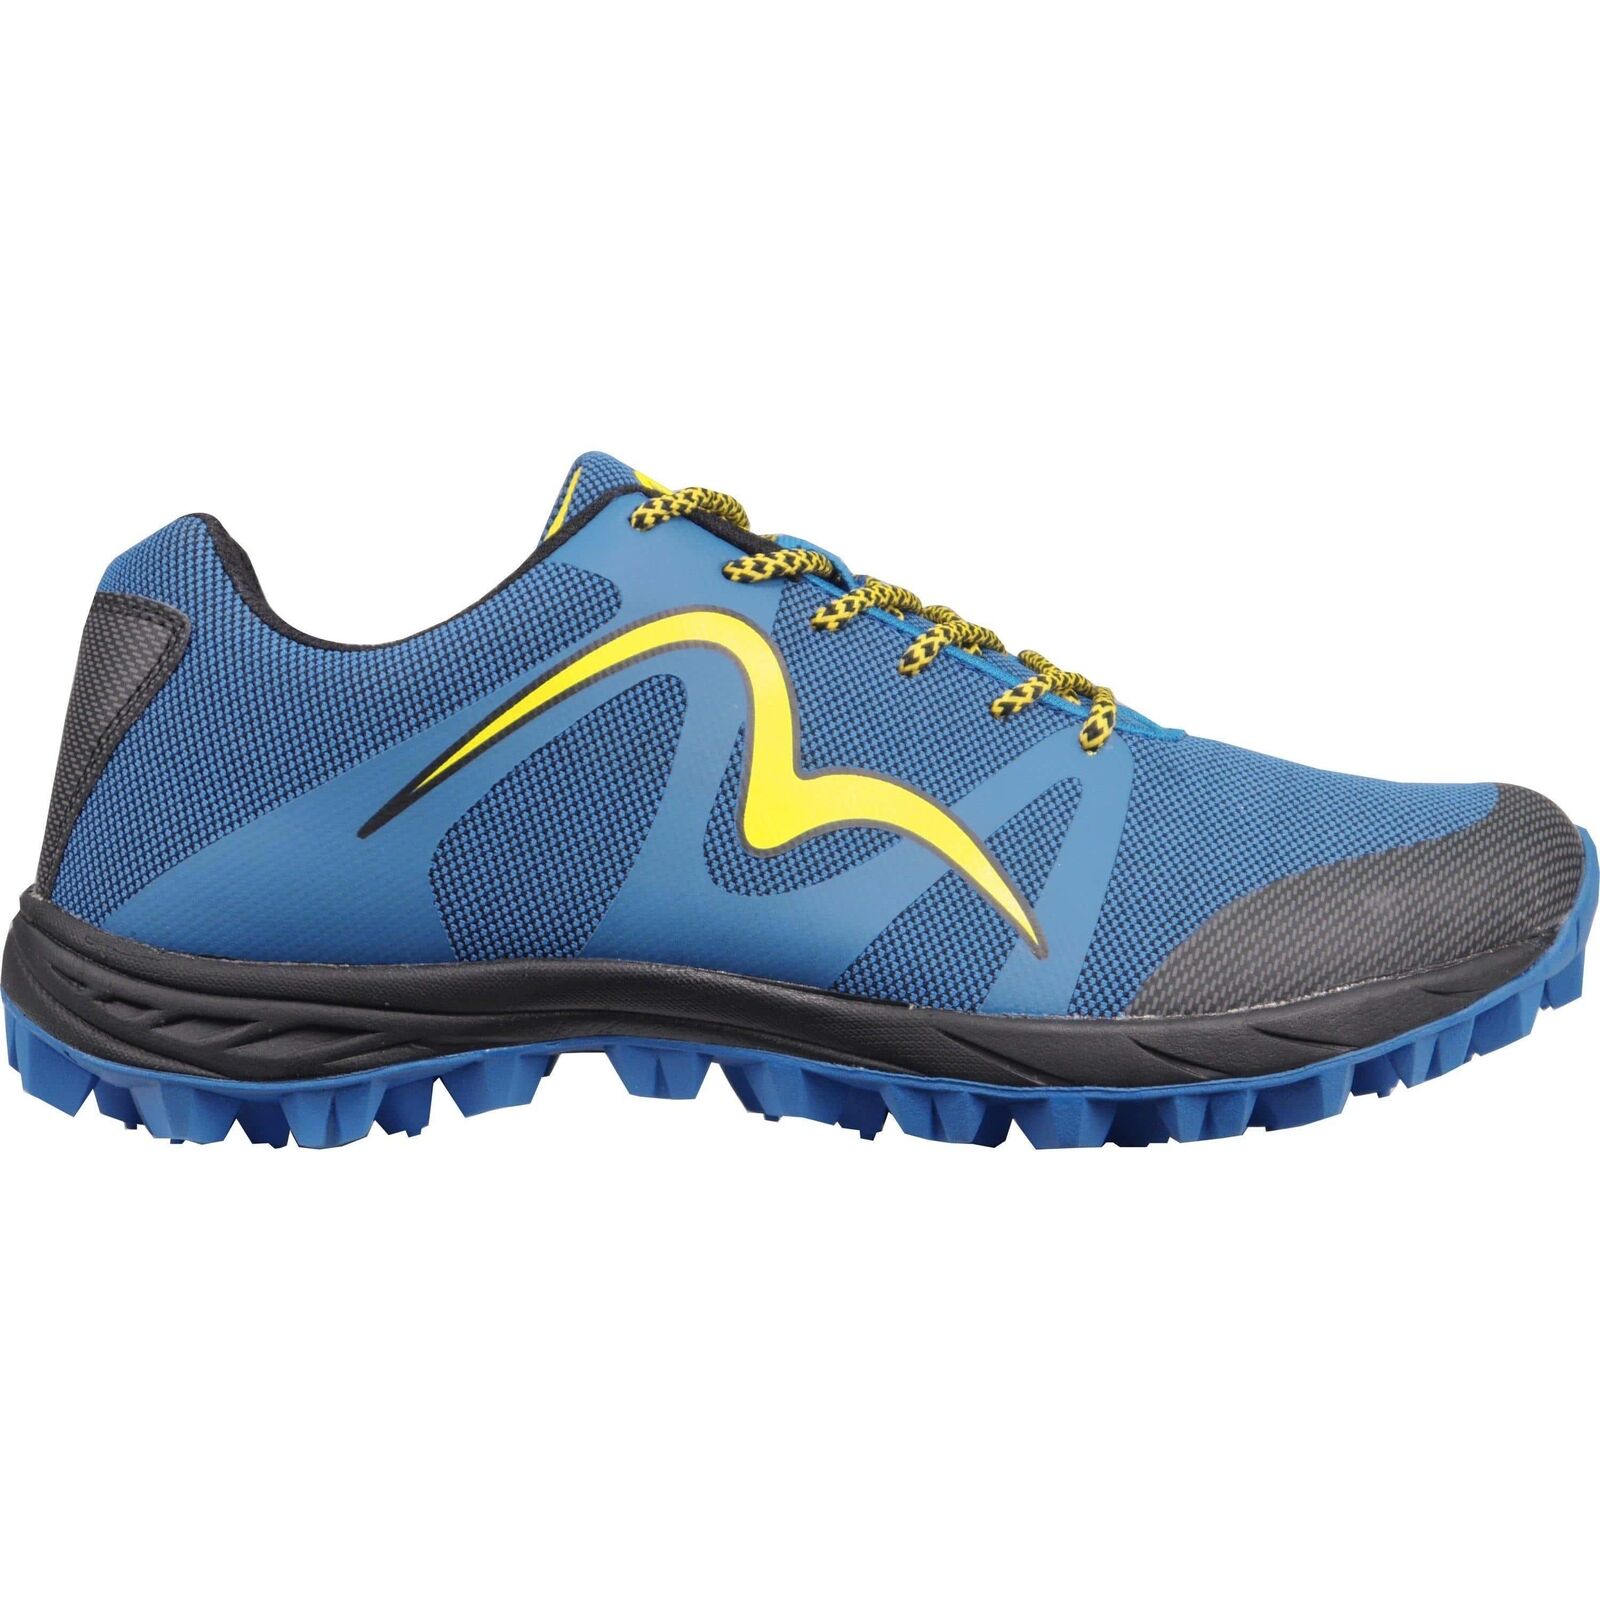 More Mile Cheviot Trail Running Shoes Blue